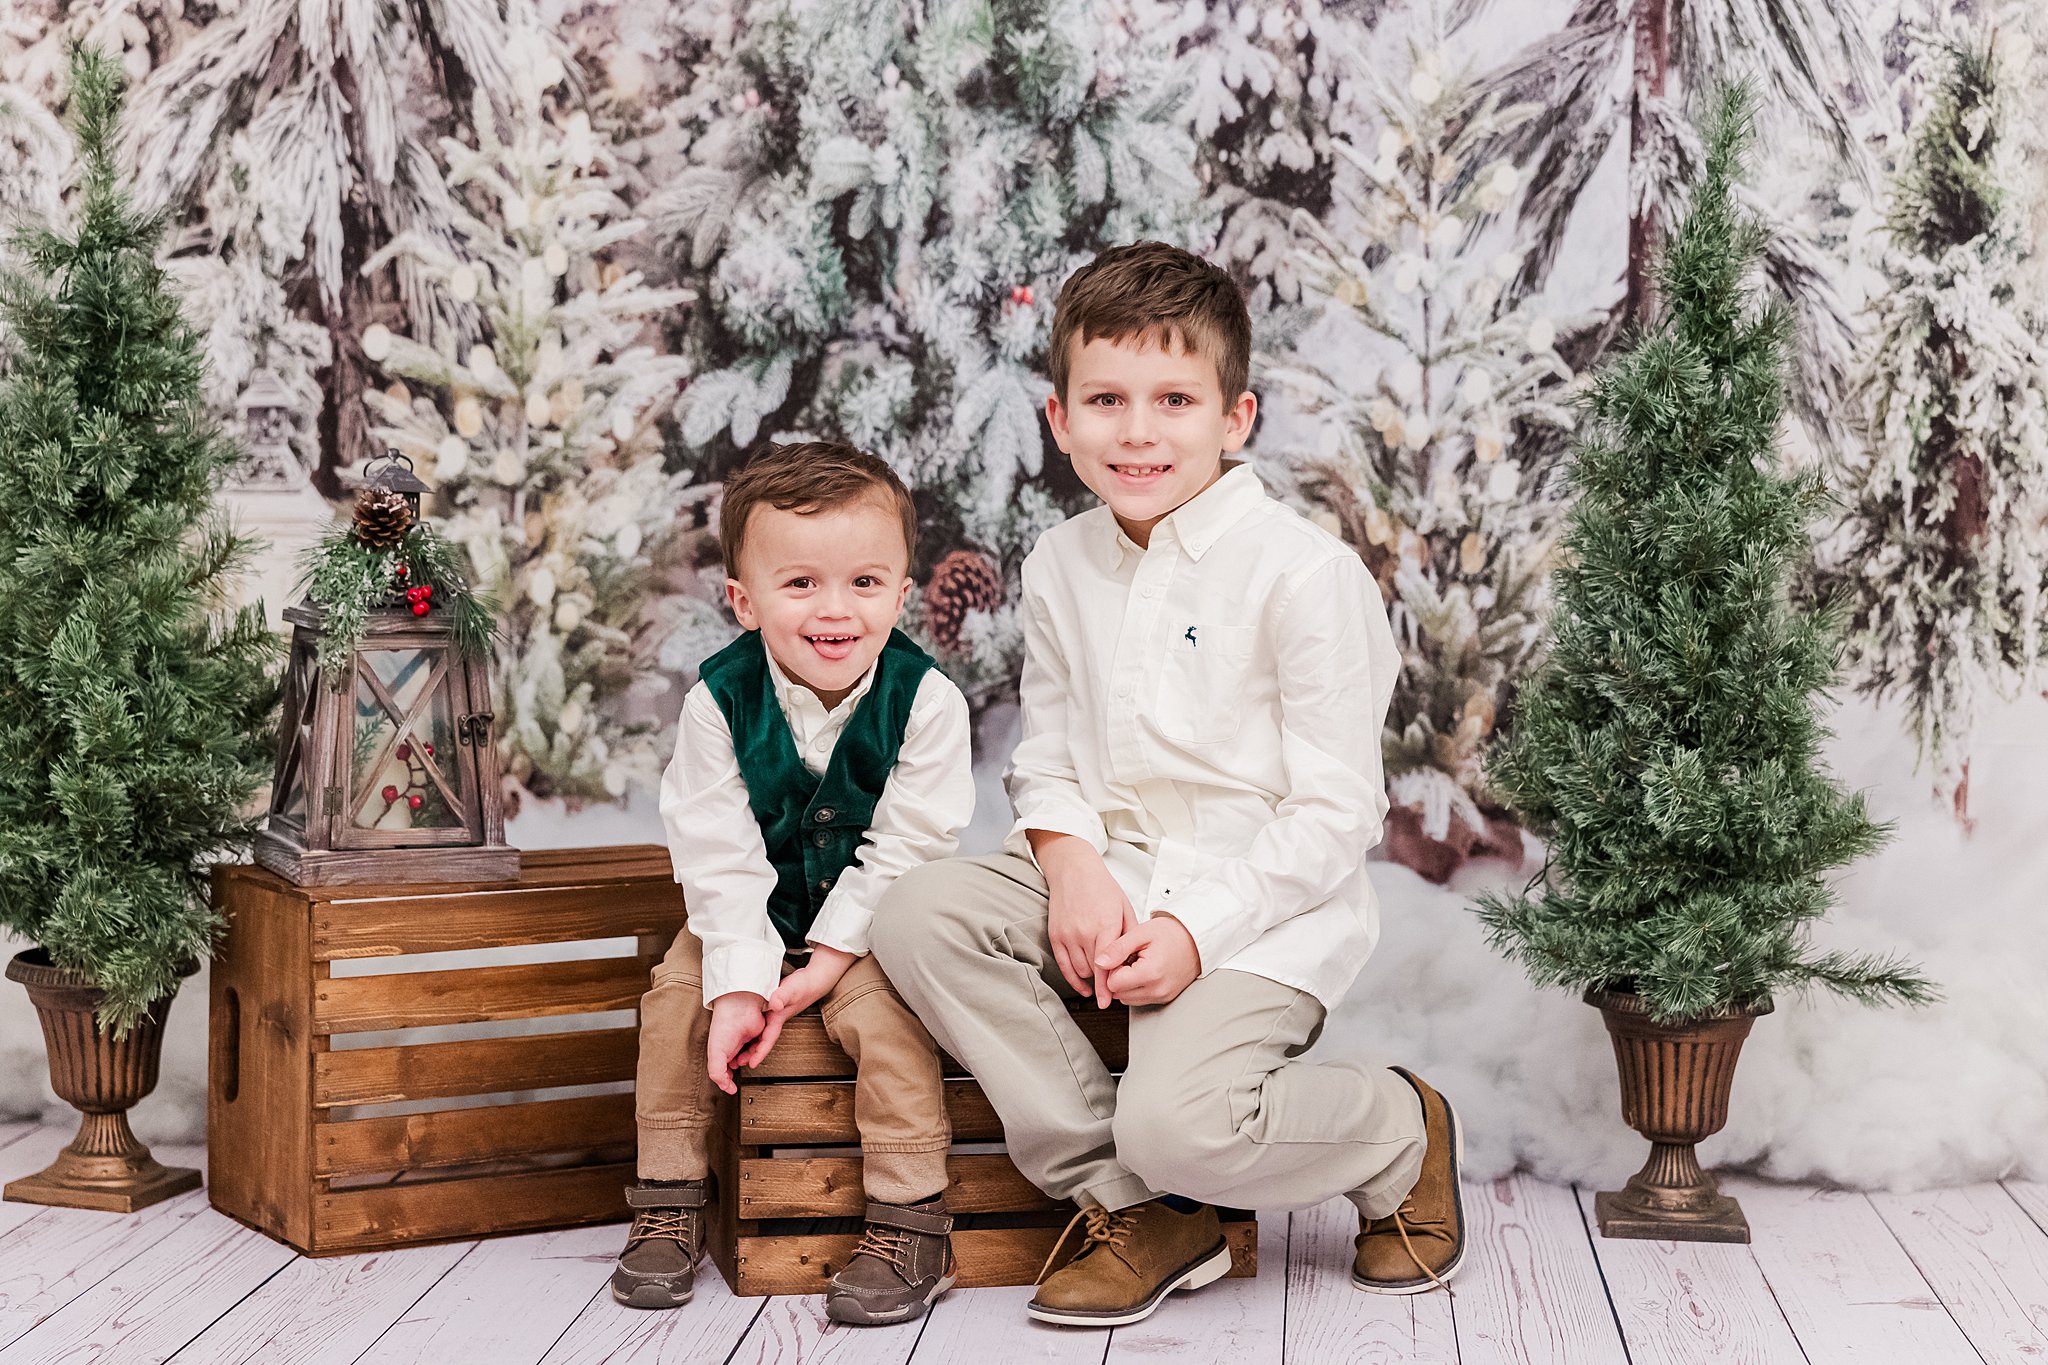 boys smile sitting on wooden crates with snowy backdrop for Christmas mini sessions in Williamsburg, VA